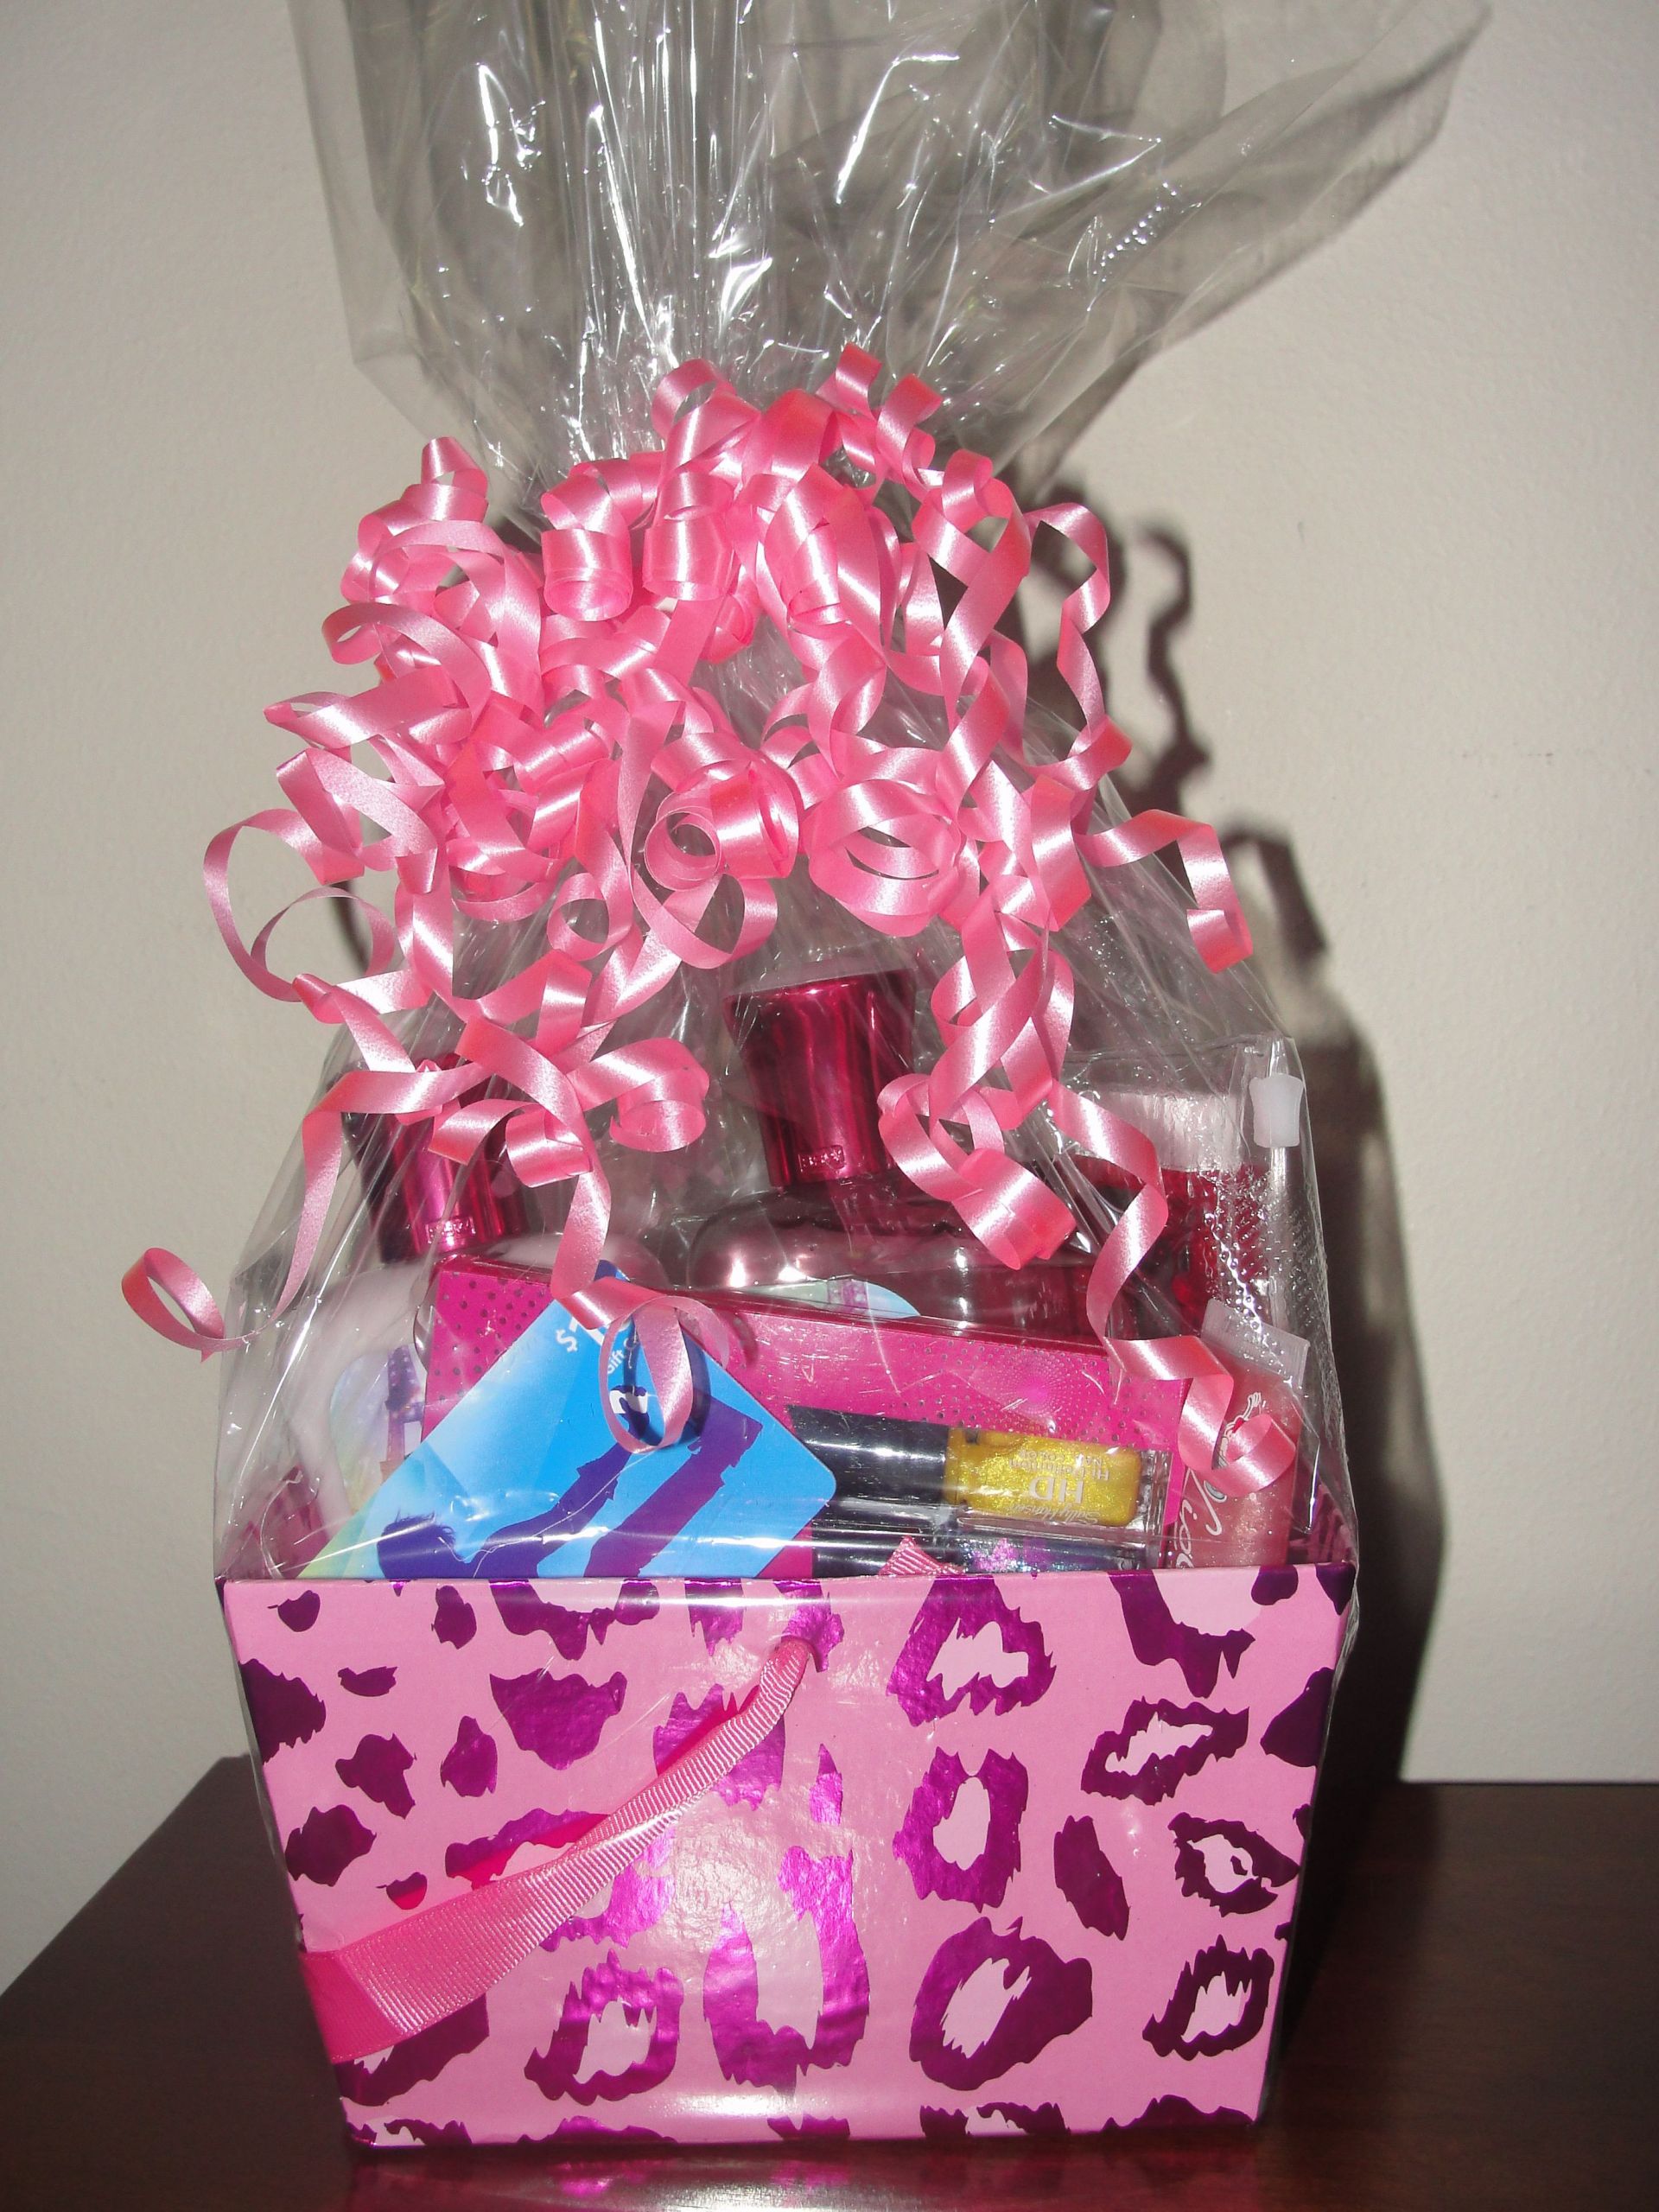 Gift Basket Ideas For Teenage Girls
 Teen Bday t basket iTunes tcard lotion candy